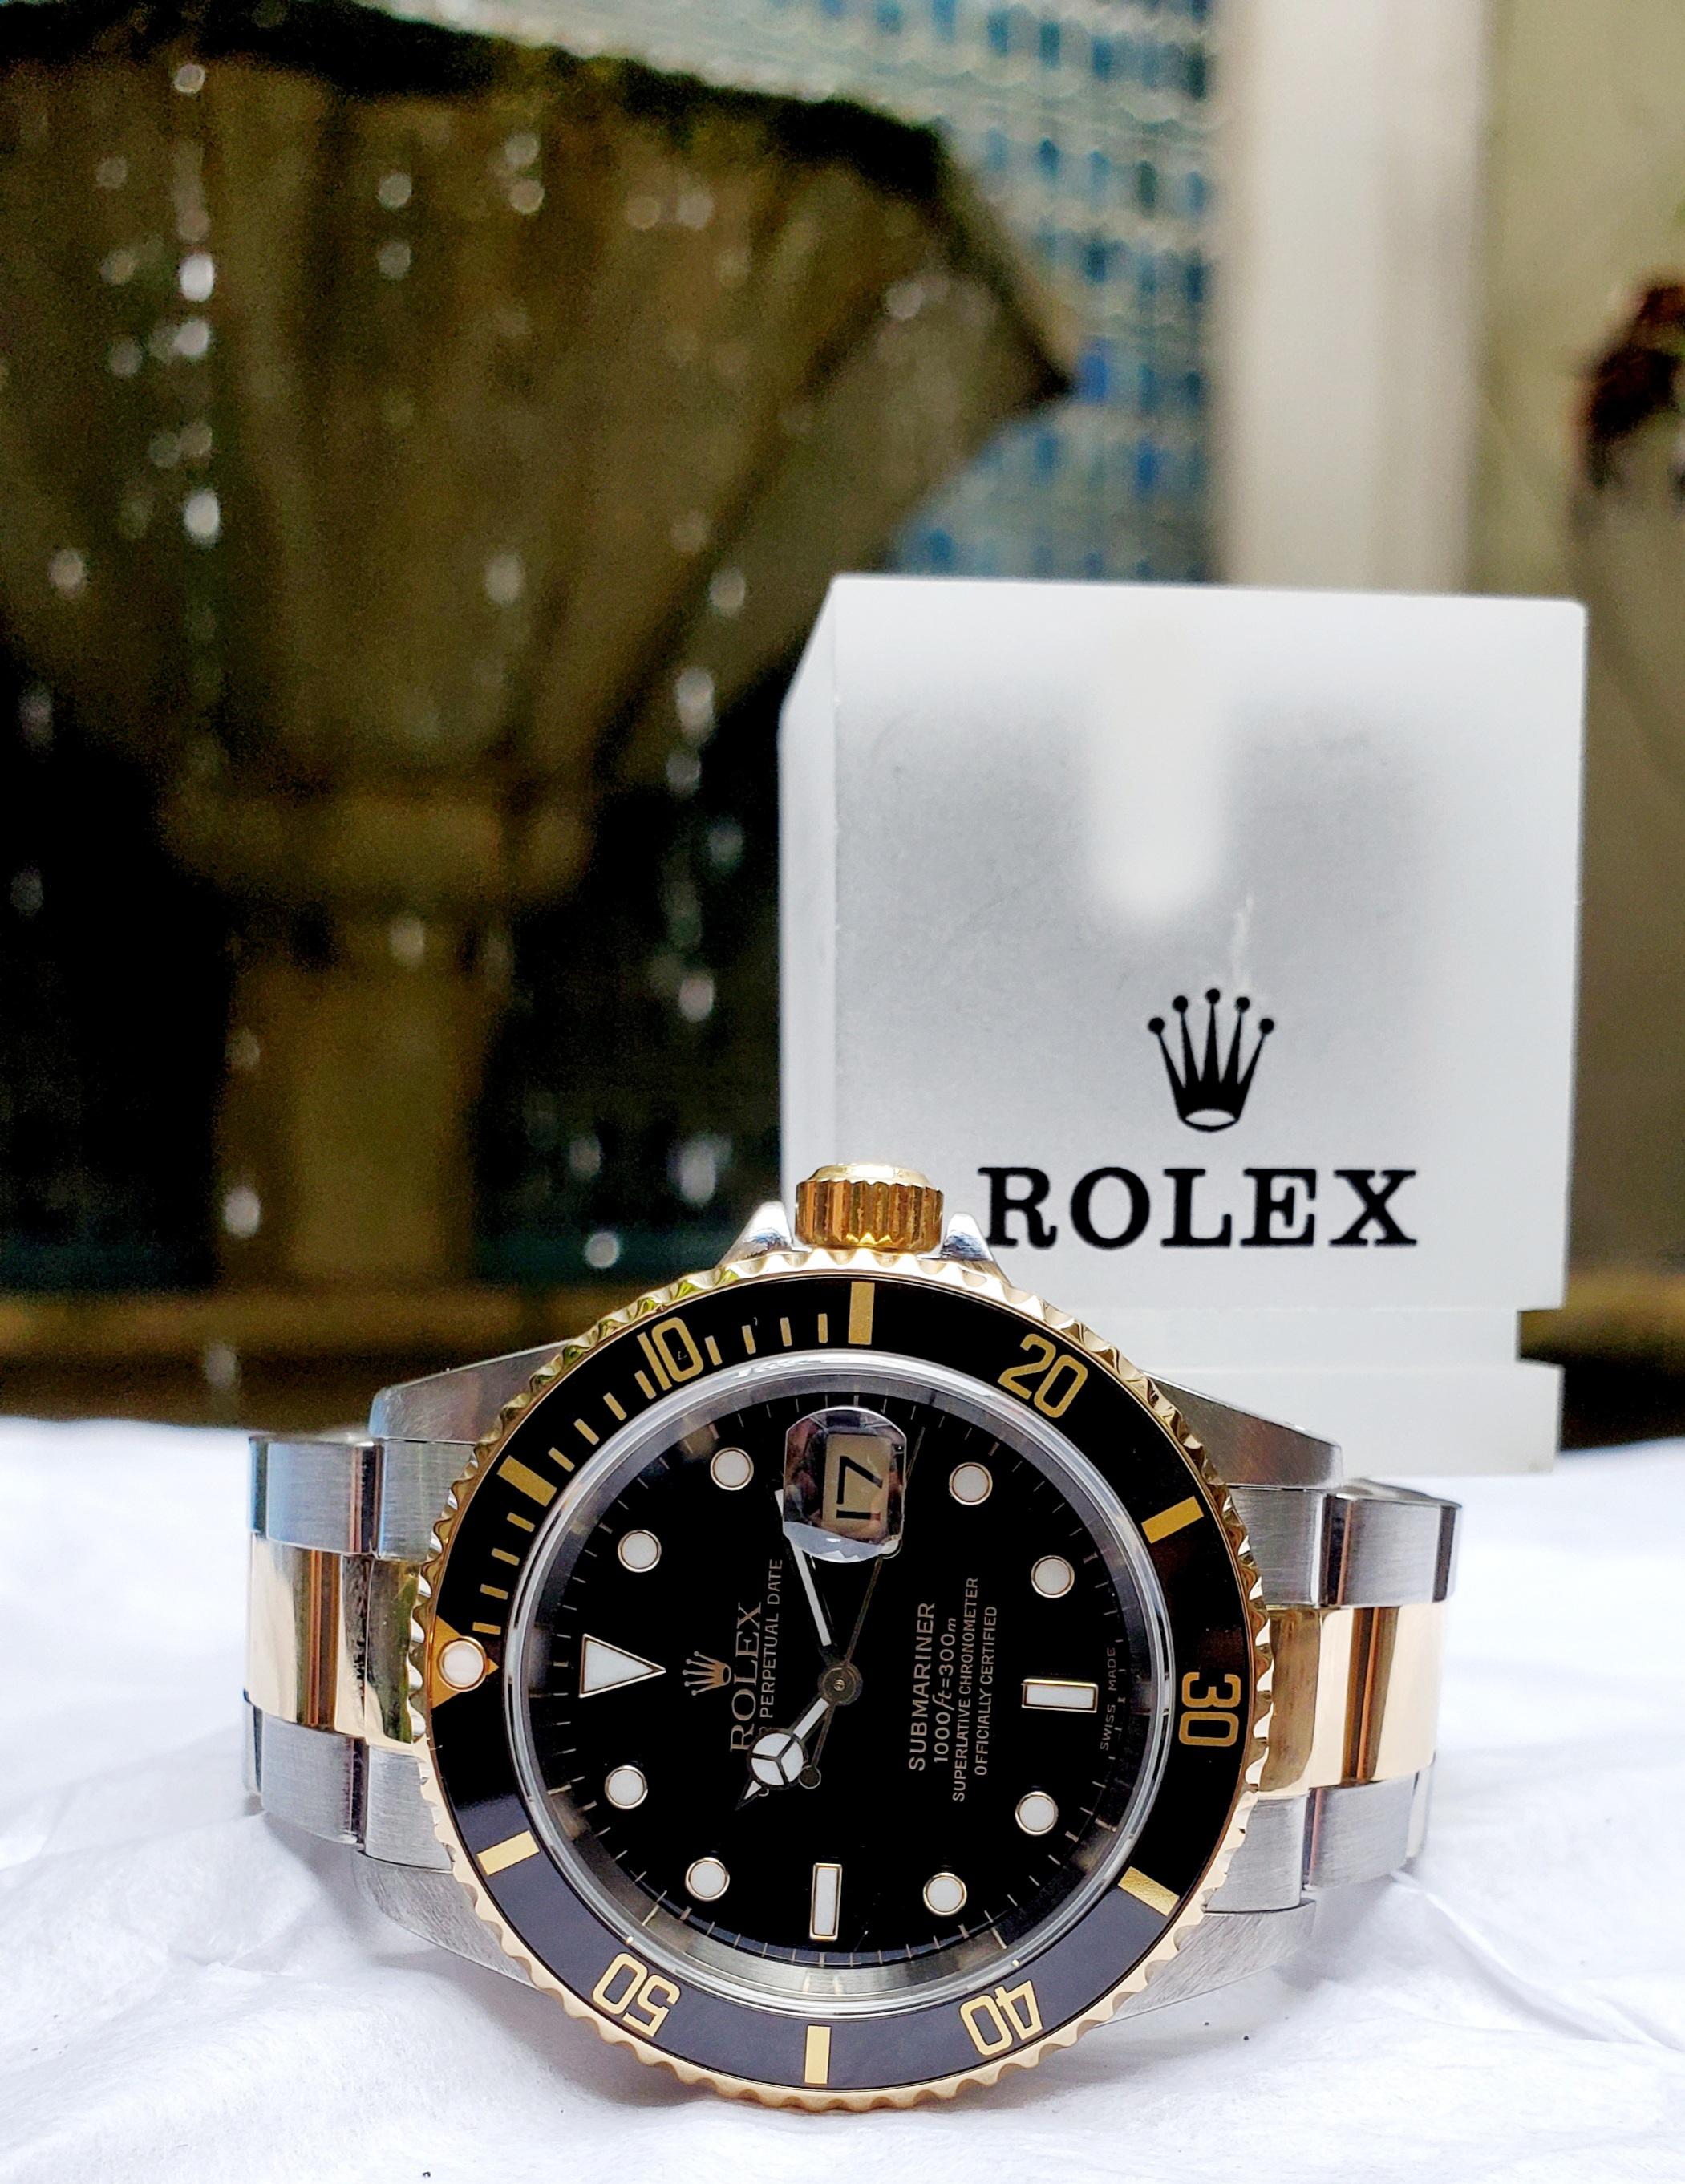 This is an extremely fine example of a well cared for vintage Rolex. This Submariner with Black Dial and Bezel is constructed from  Stainless Steel and 18kt yellow gold. The Oyster link style bracelet holds its form and is situated with a good